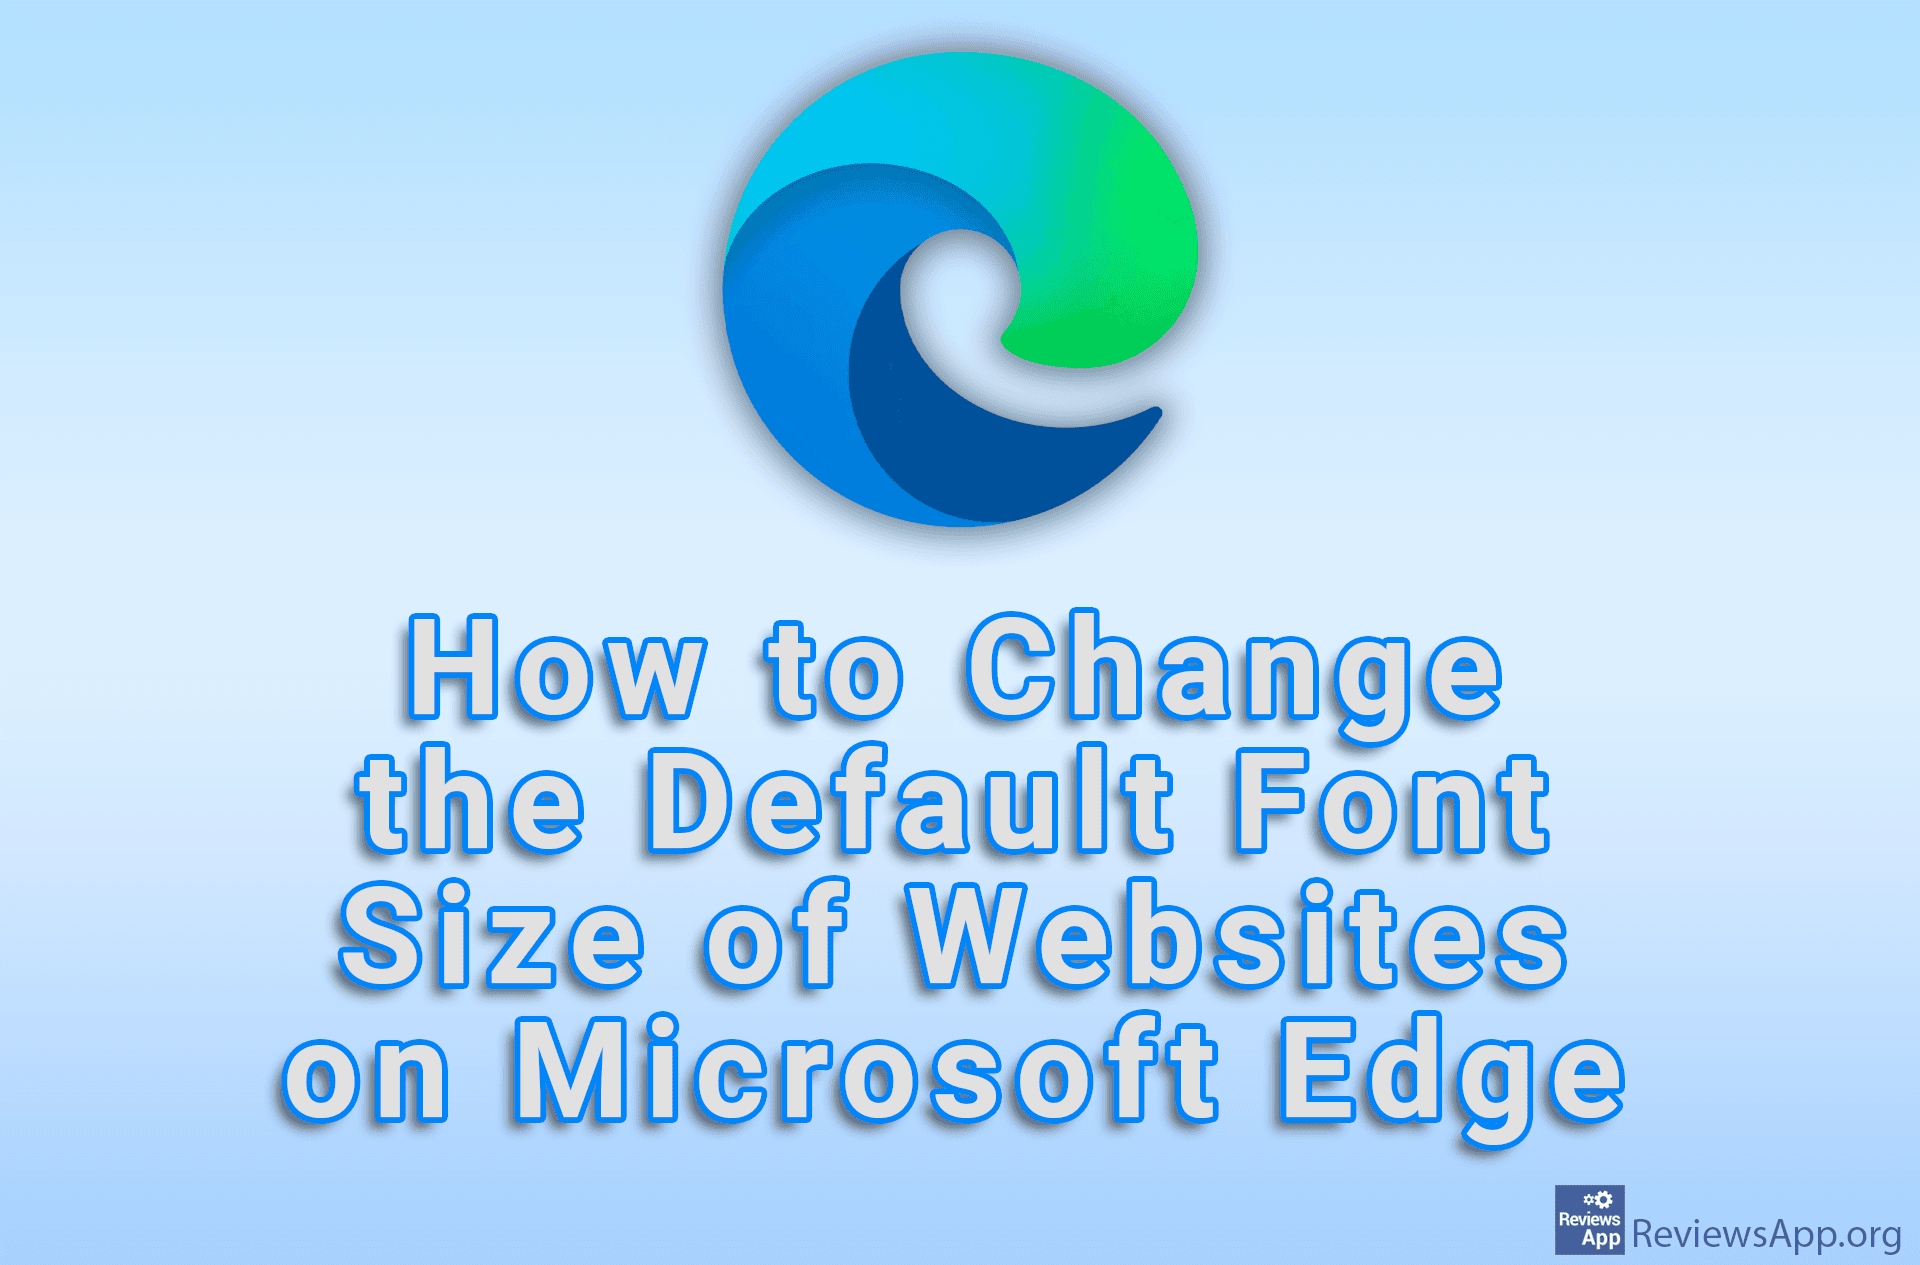 How to Change the Default Font Size of Websites on Microsoft Edge